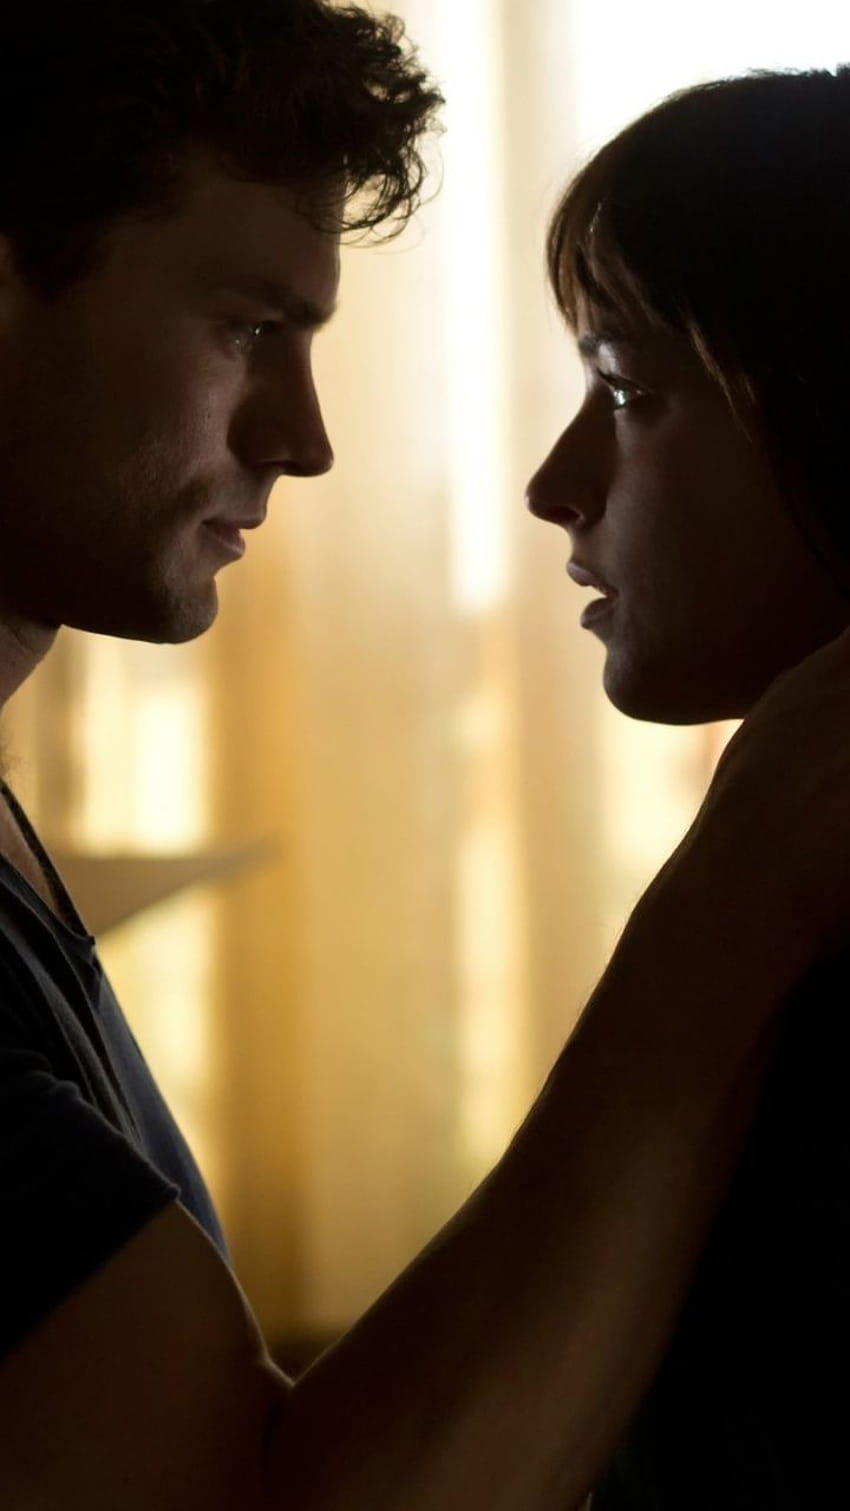 720x1280 Fifty Shades of Grey Couple PC and Mac, fifty shades of grey iphone HD phone wallpaper